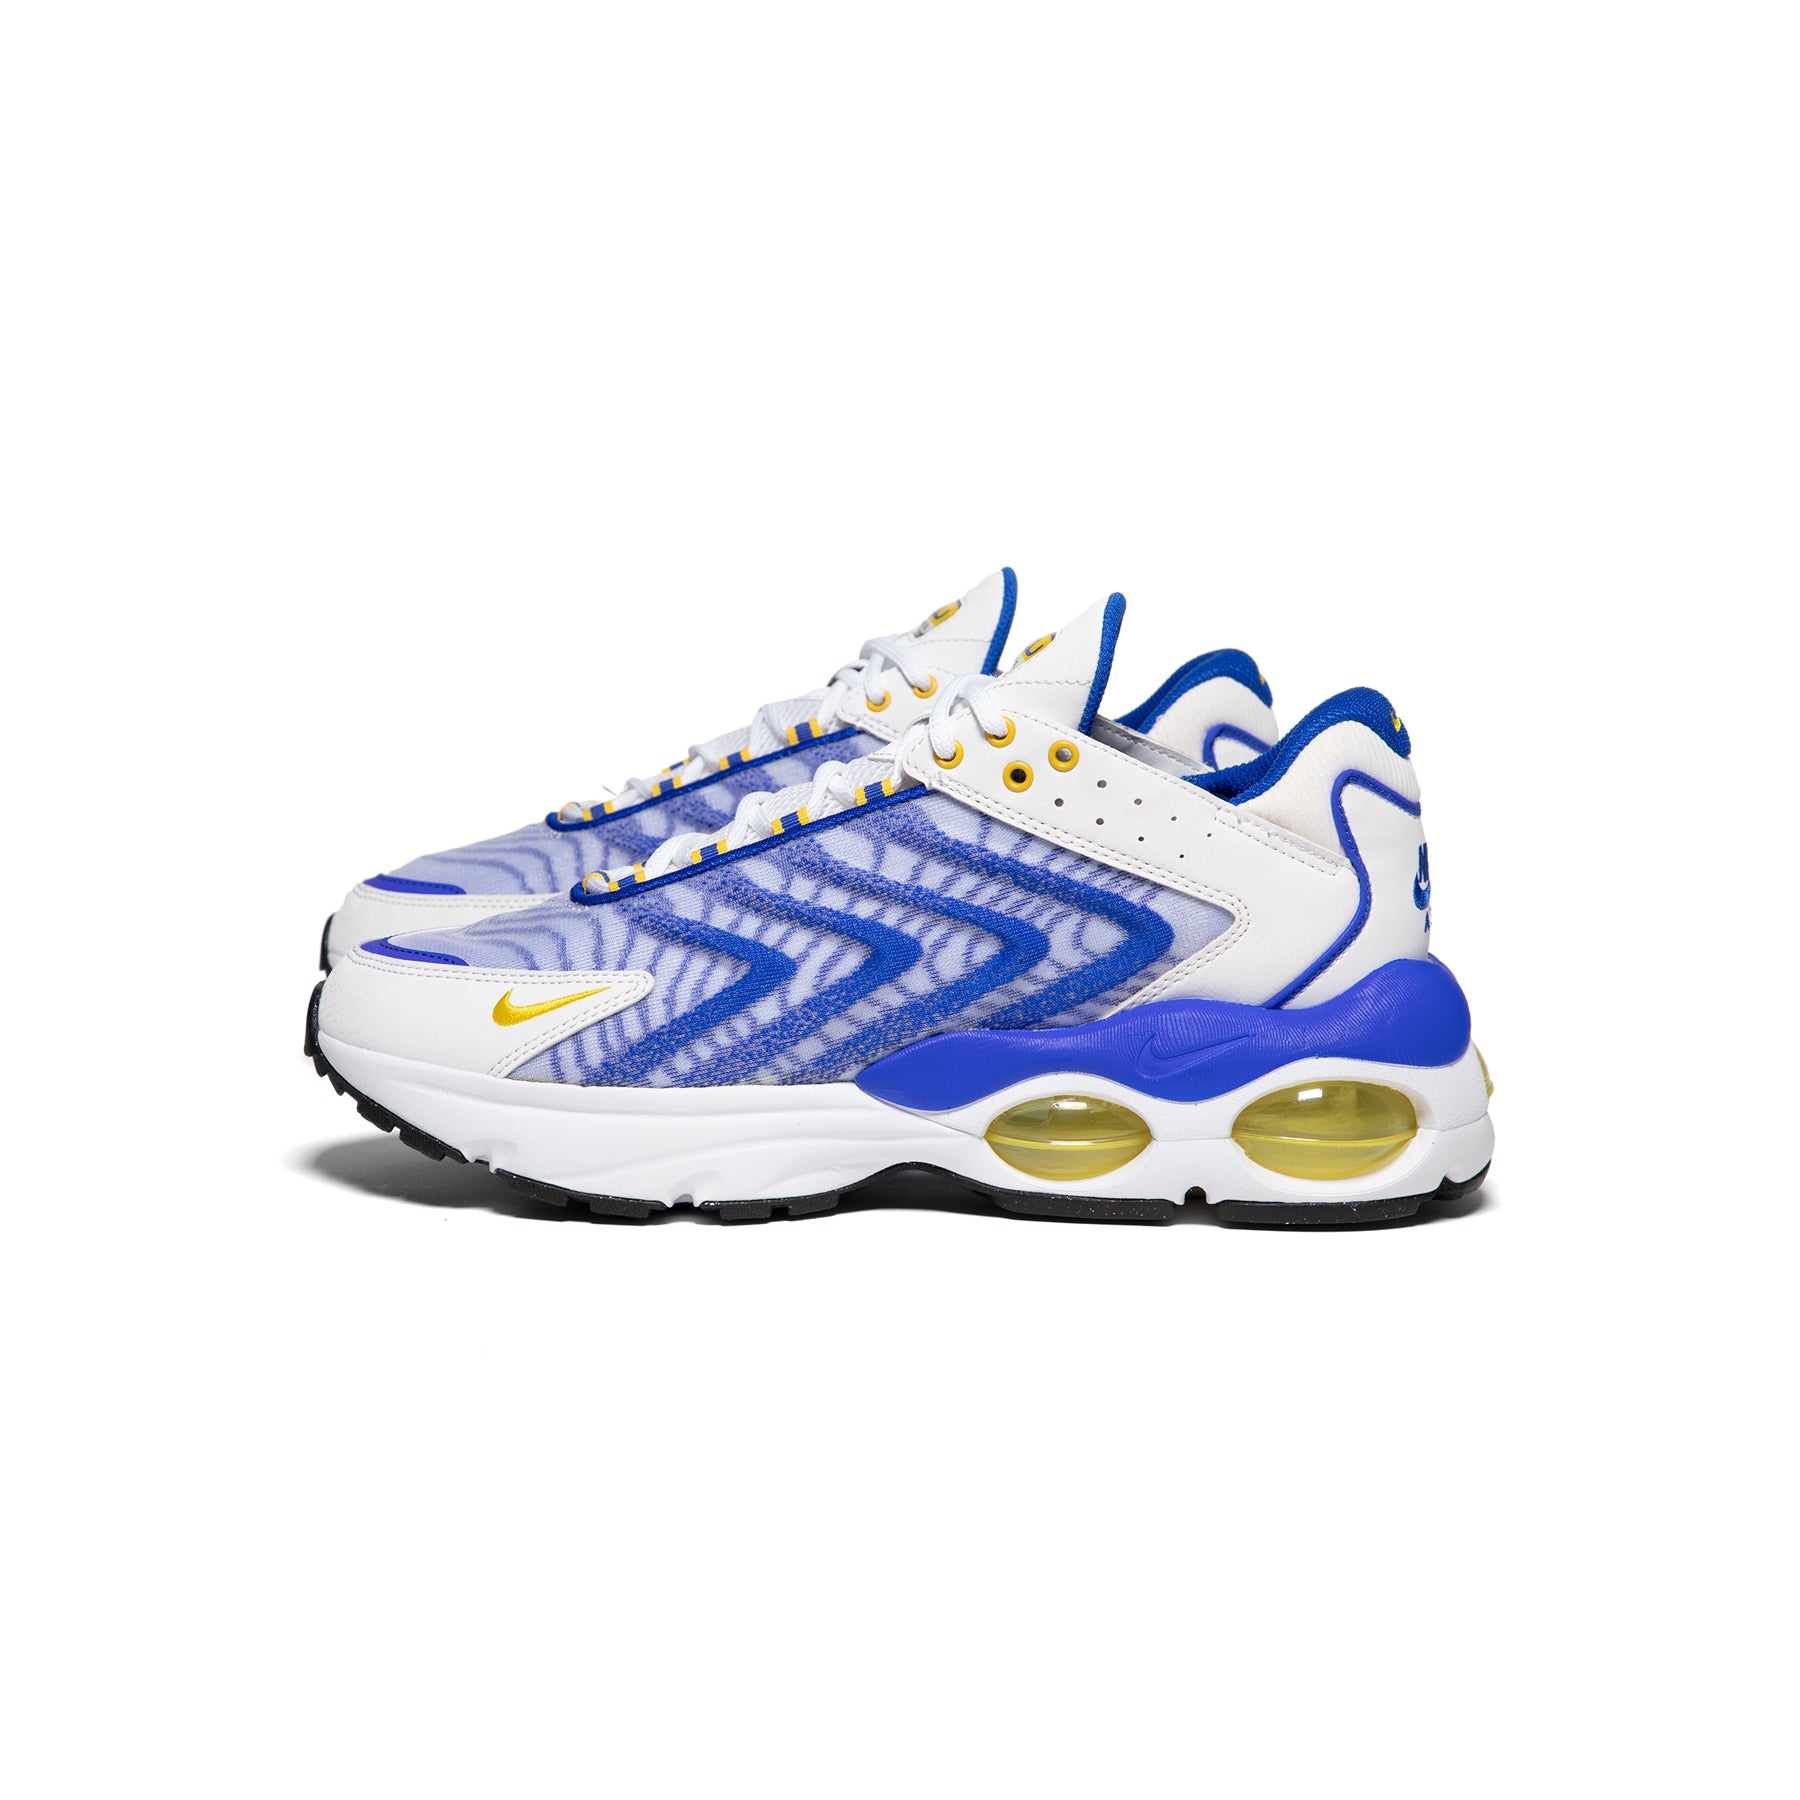 Ved navn Beskrive Tidsserier Nike Air Max TW (White/Soeed Yellow/Racer Blue/Black) – Concepts